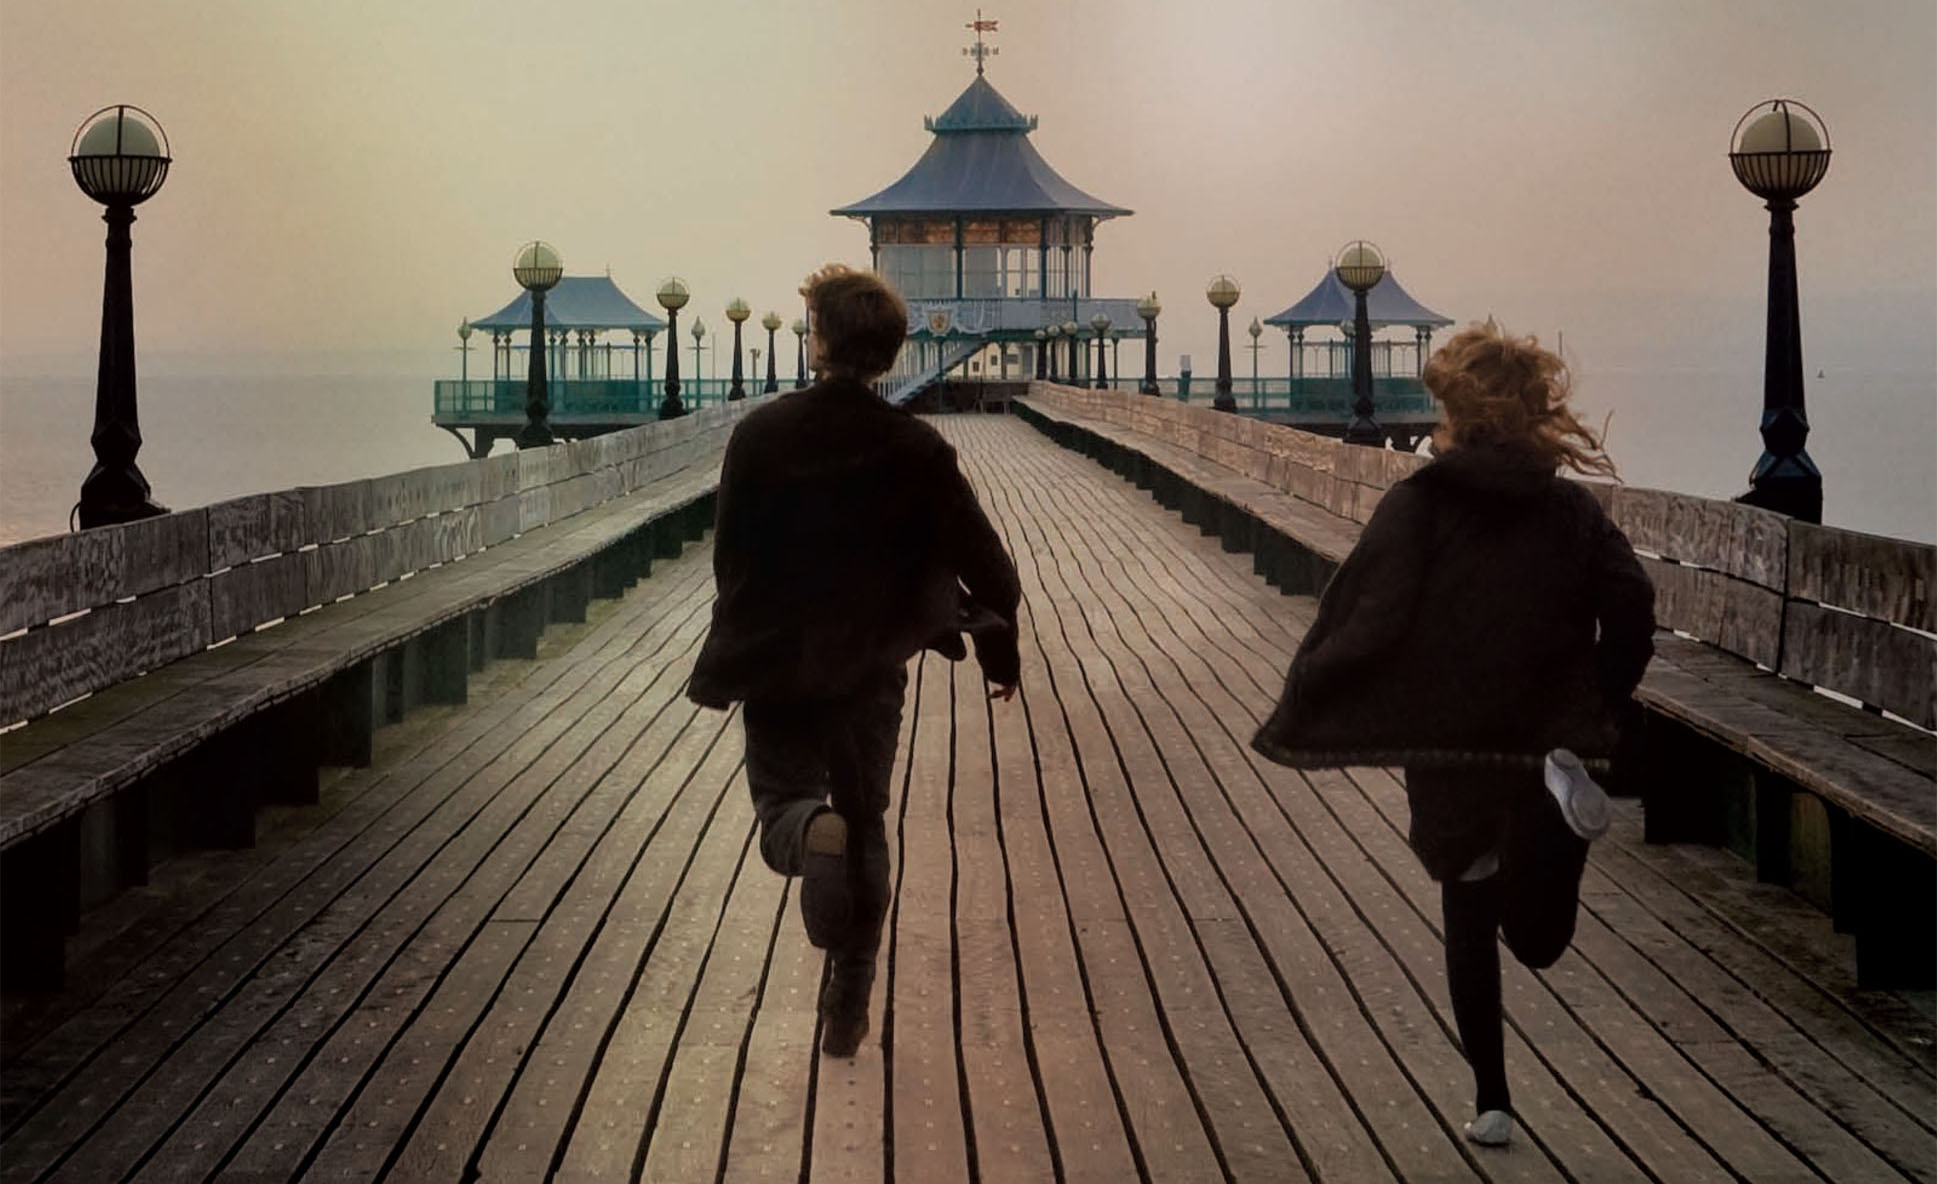 Tommy and Kathy running down a boardwalk - from the movie adaption of 'Never Let Me Go'